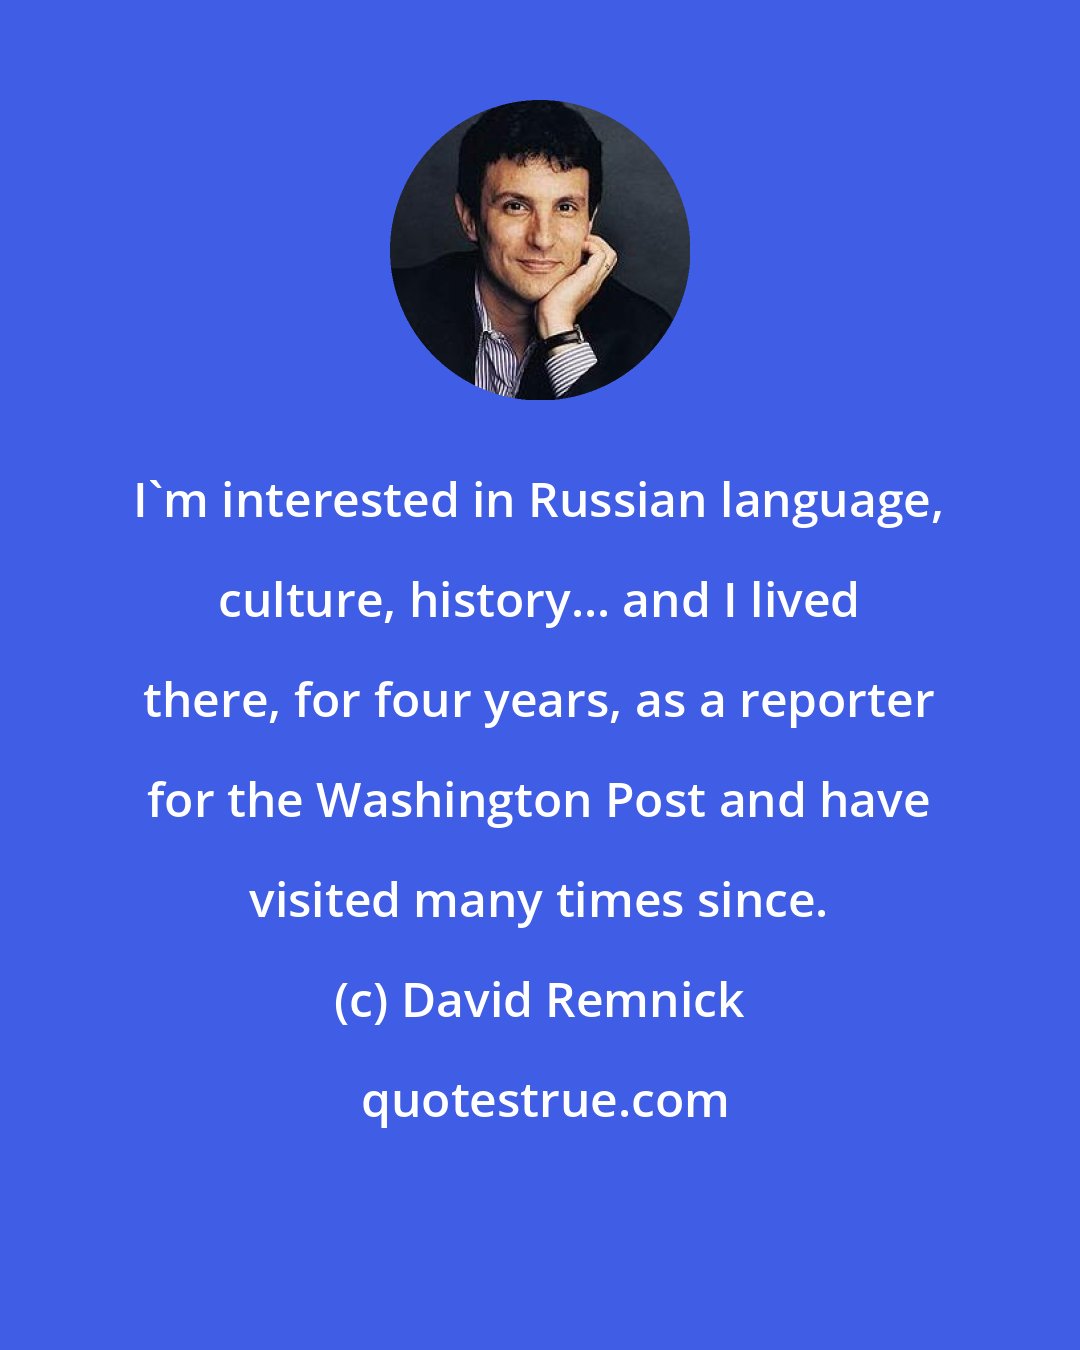 David Remnick: I'm interested in Russian language, culture, history... and I lived there, for four years, as a reporter for the Washington Post and have visited many times since.